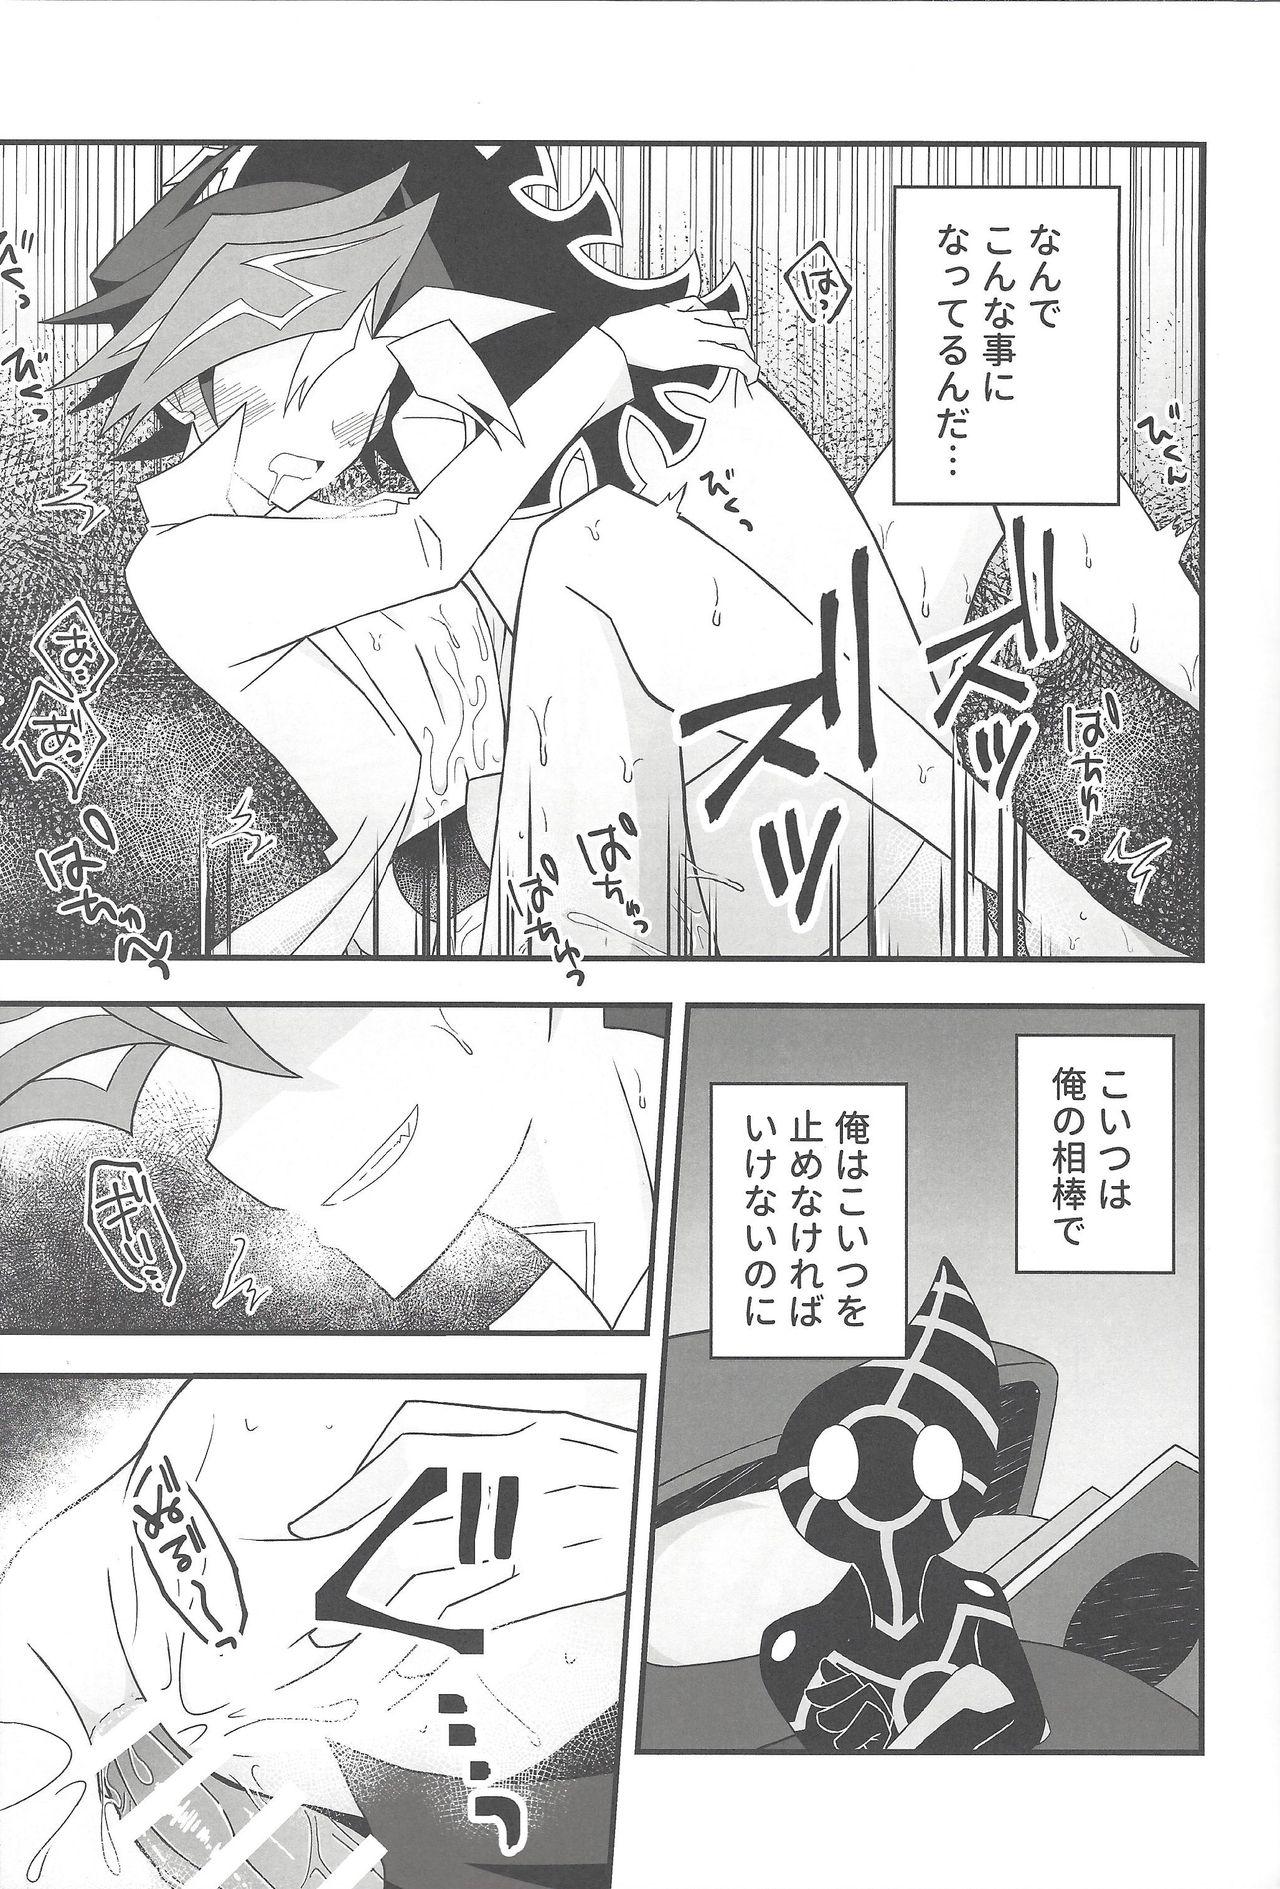 Tits Happy End - Yu gi oh vrains Romantic - Page 5